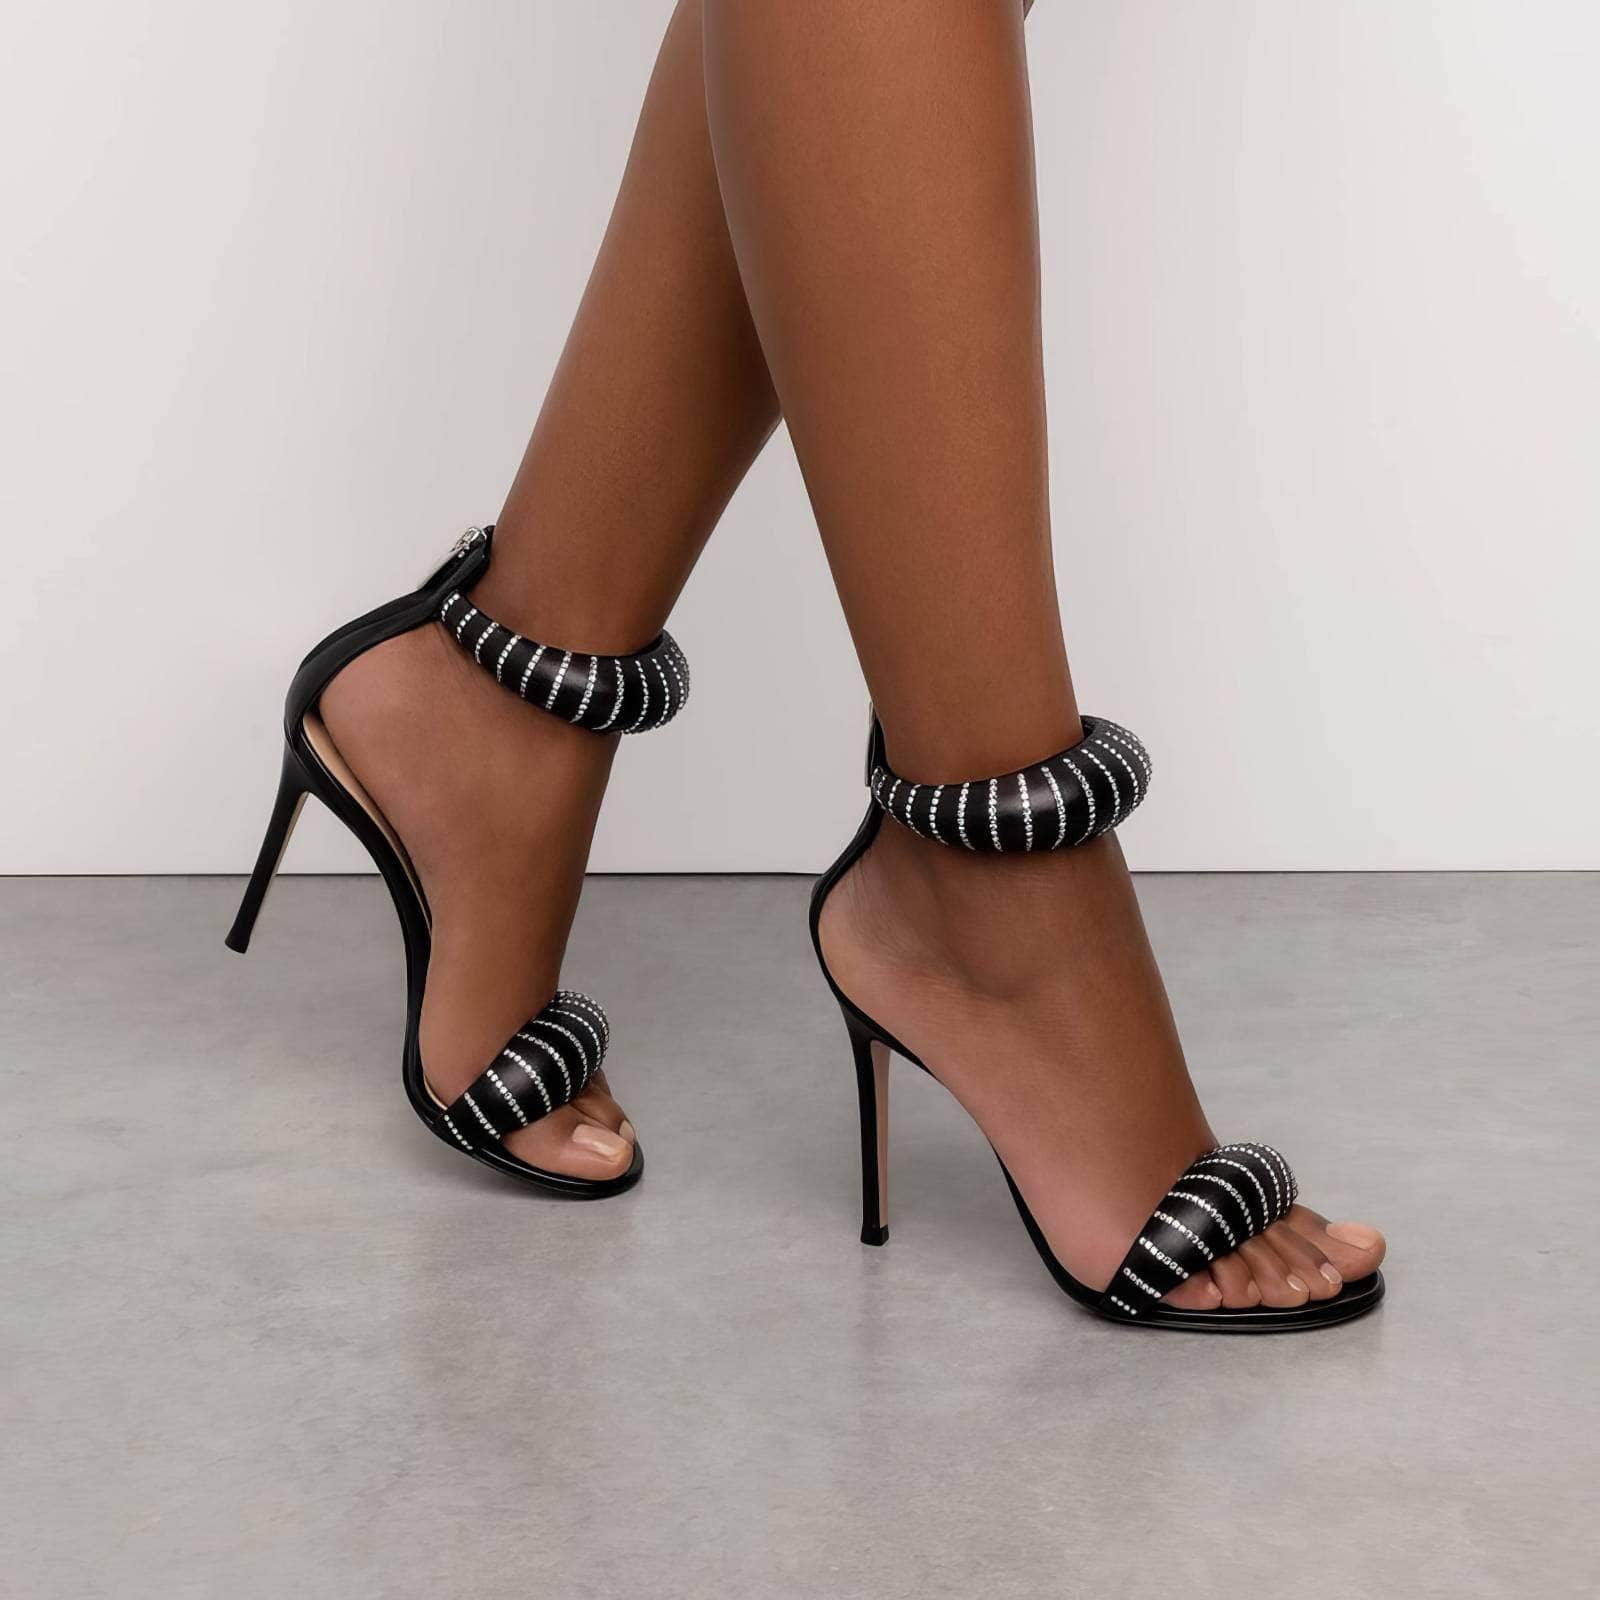 Chic Ankle Strap Leather High Heels